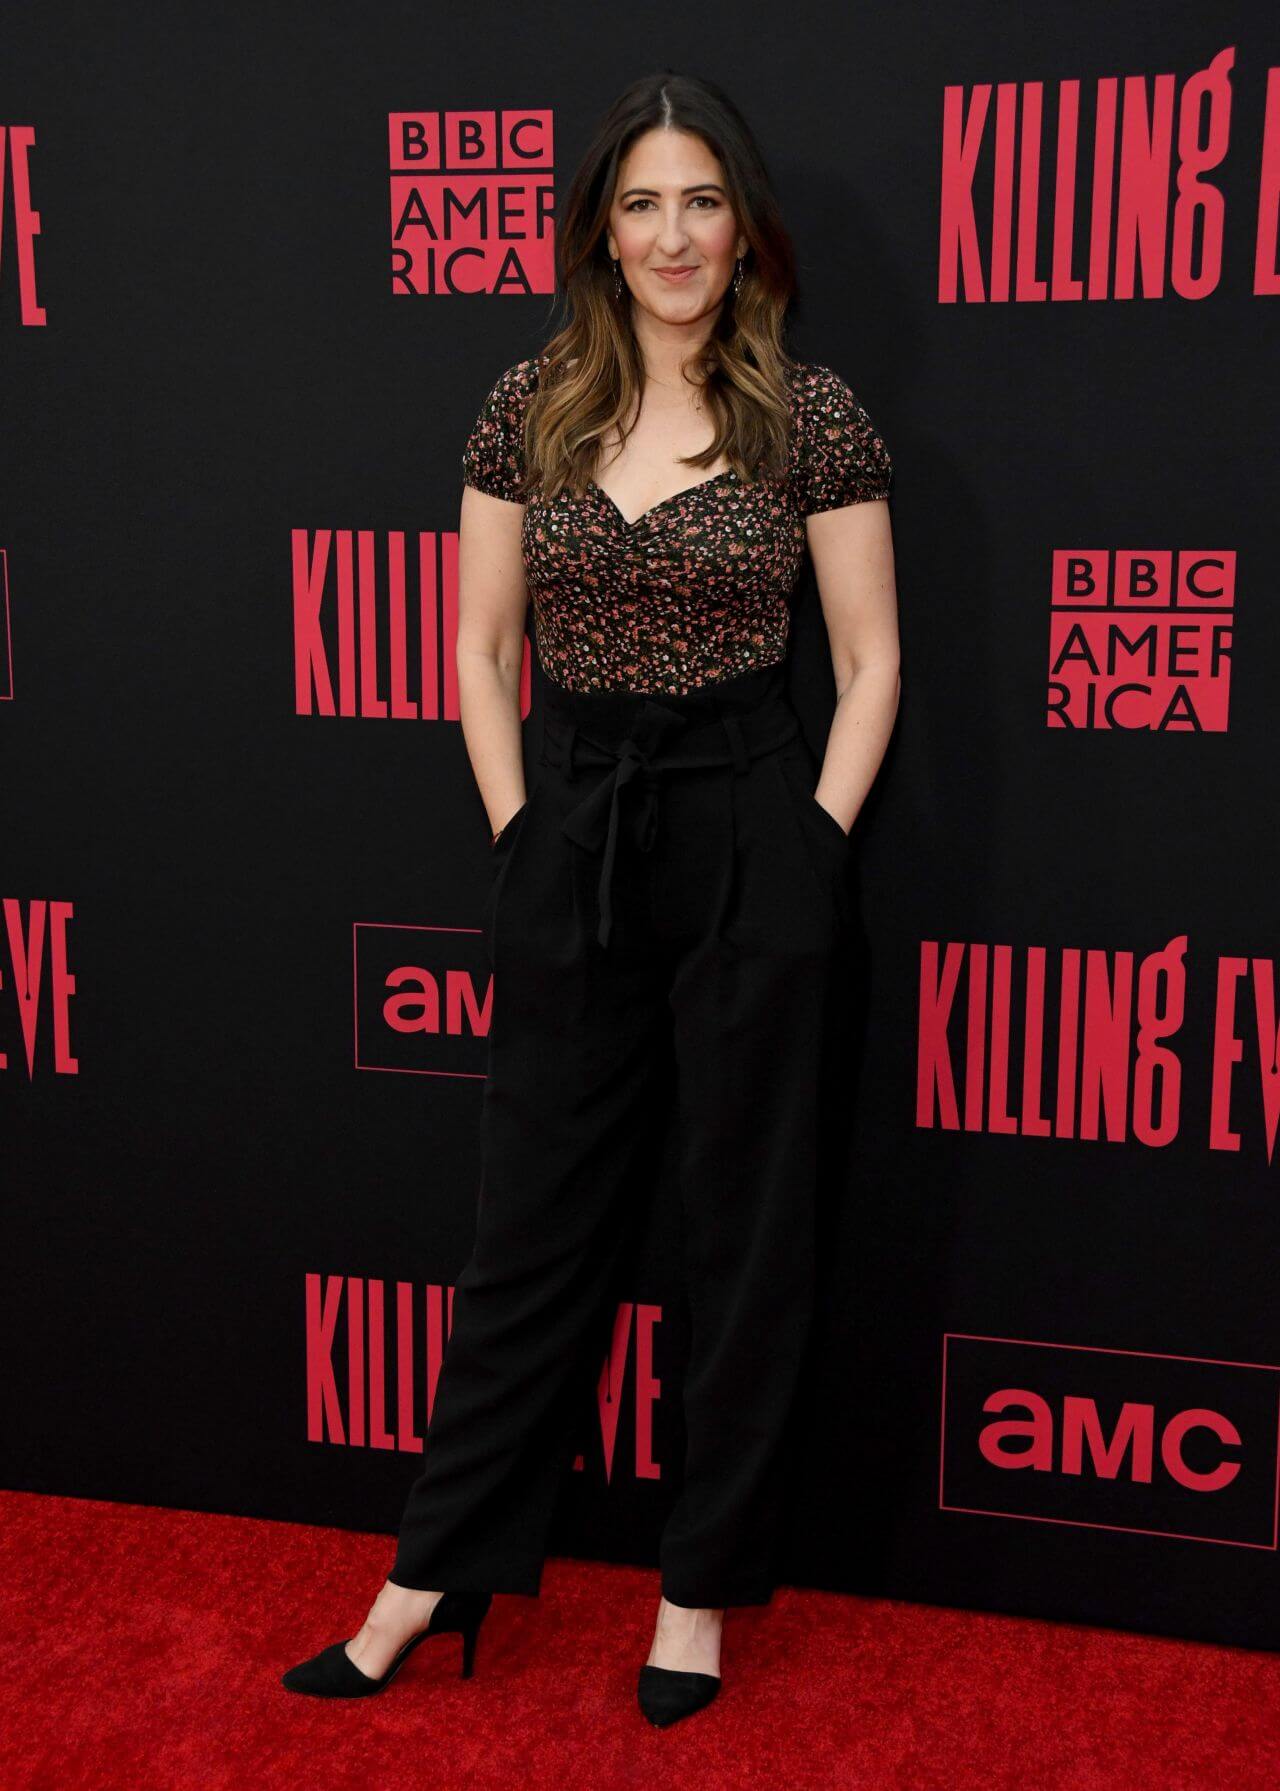 D’Arcy Carden In Printed Top With Black Pants 